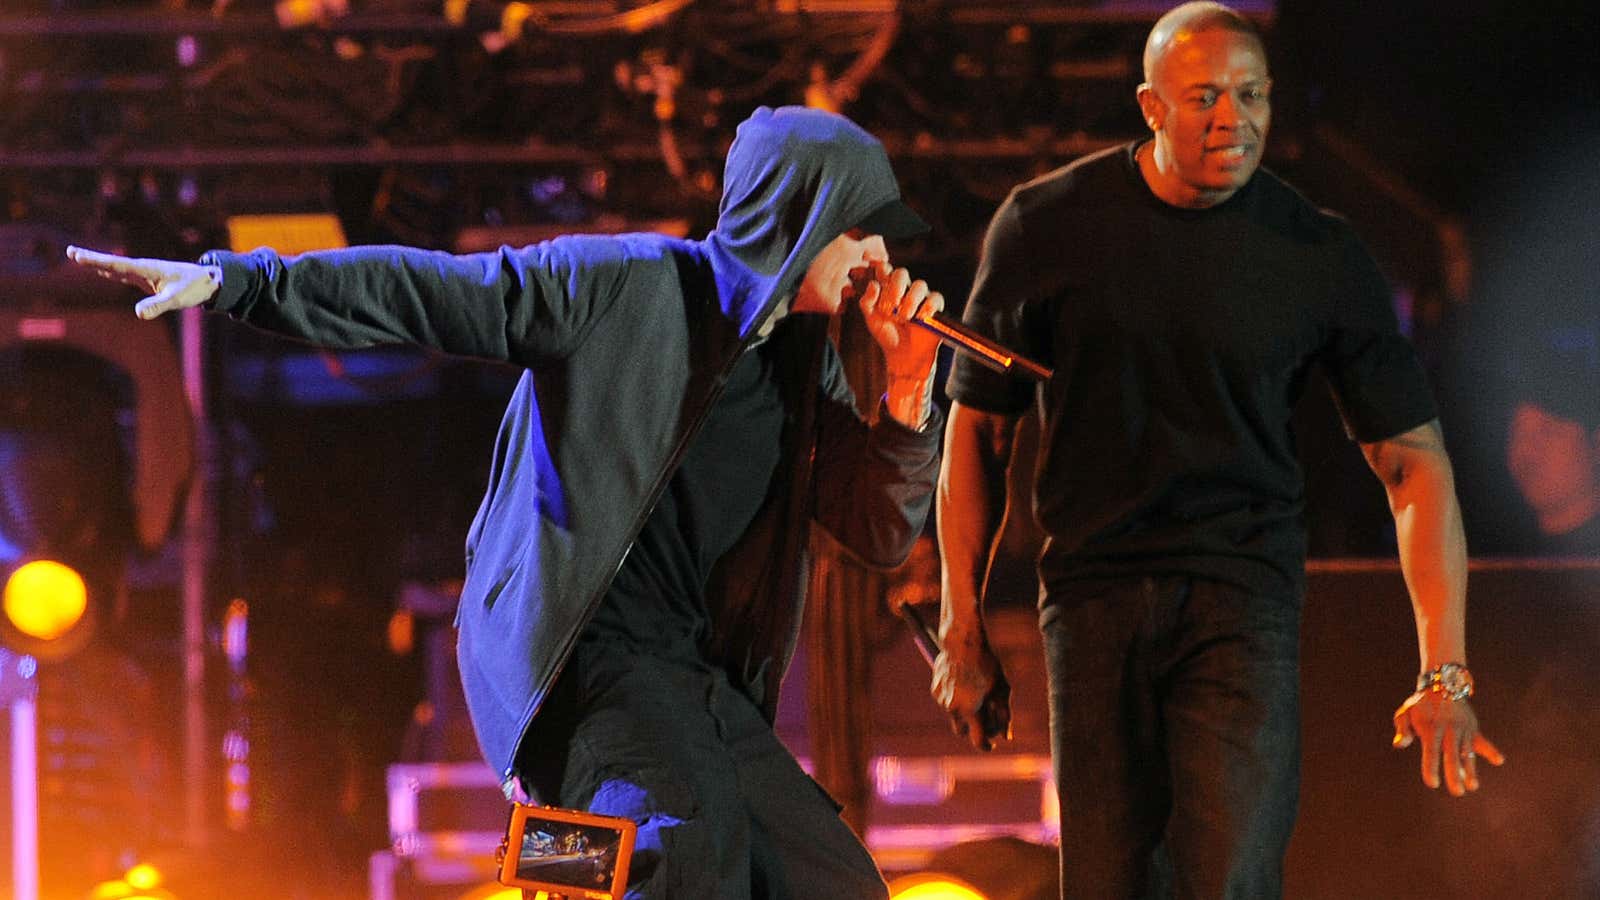 Eminem (left) and Dr. Dre (right) at the Coachella music festival in 2012.